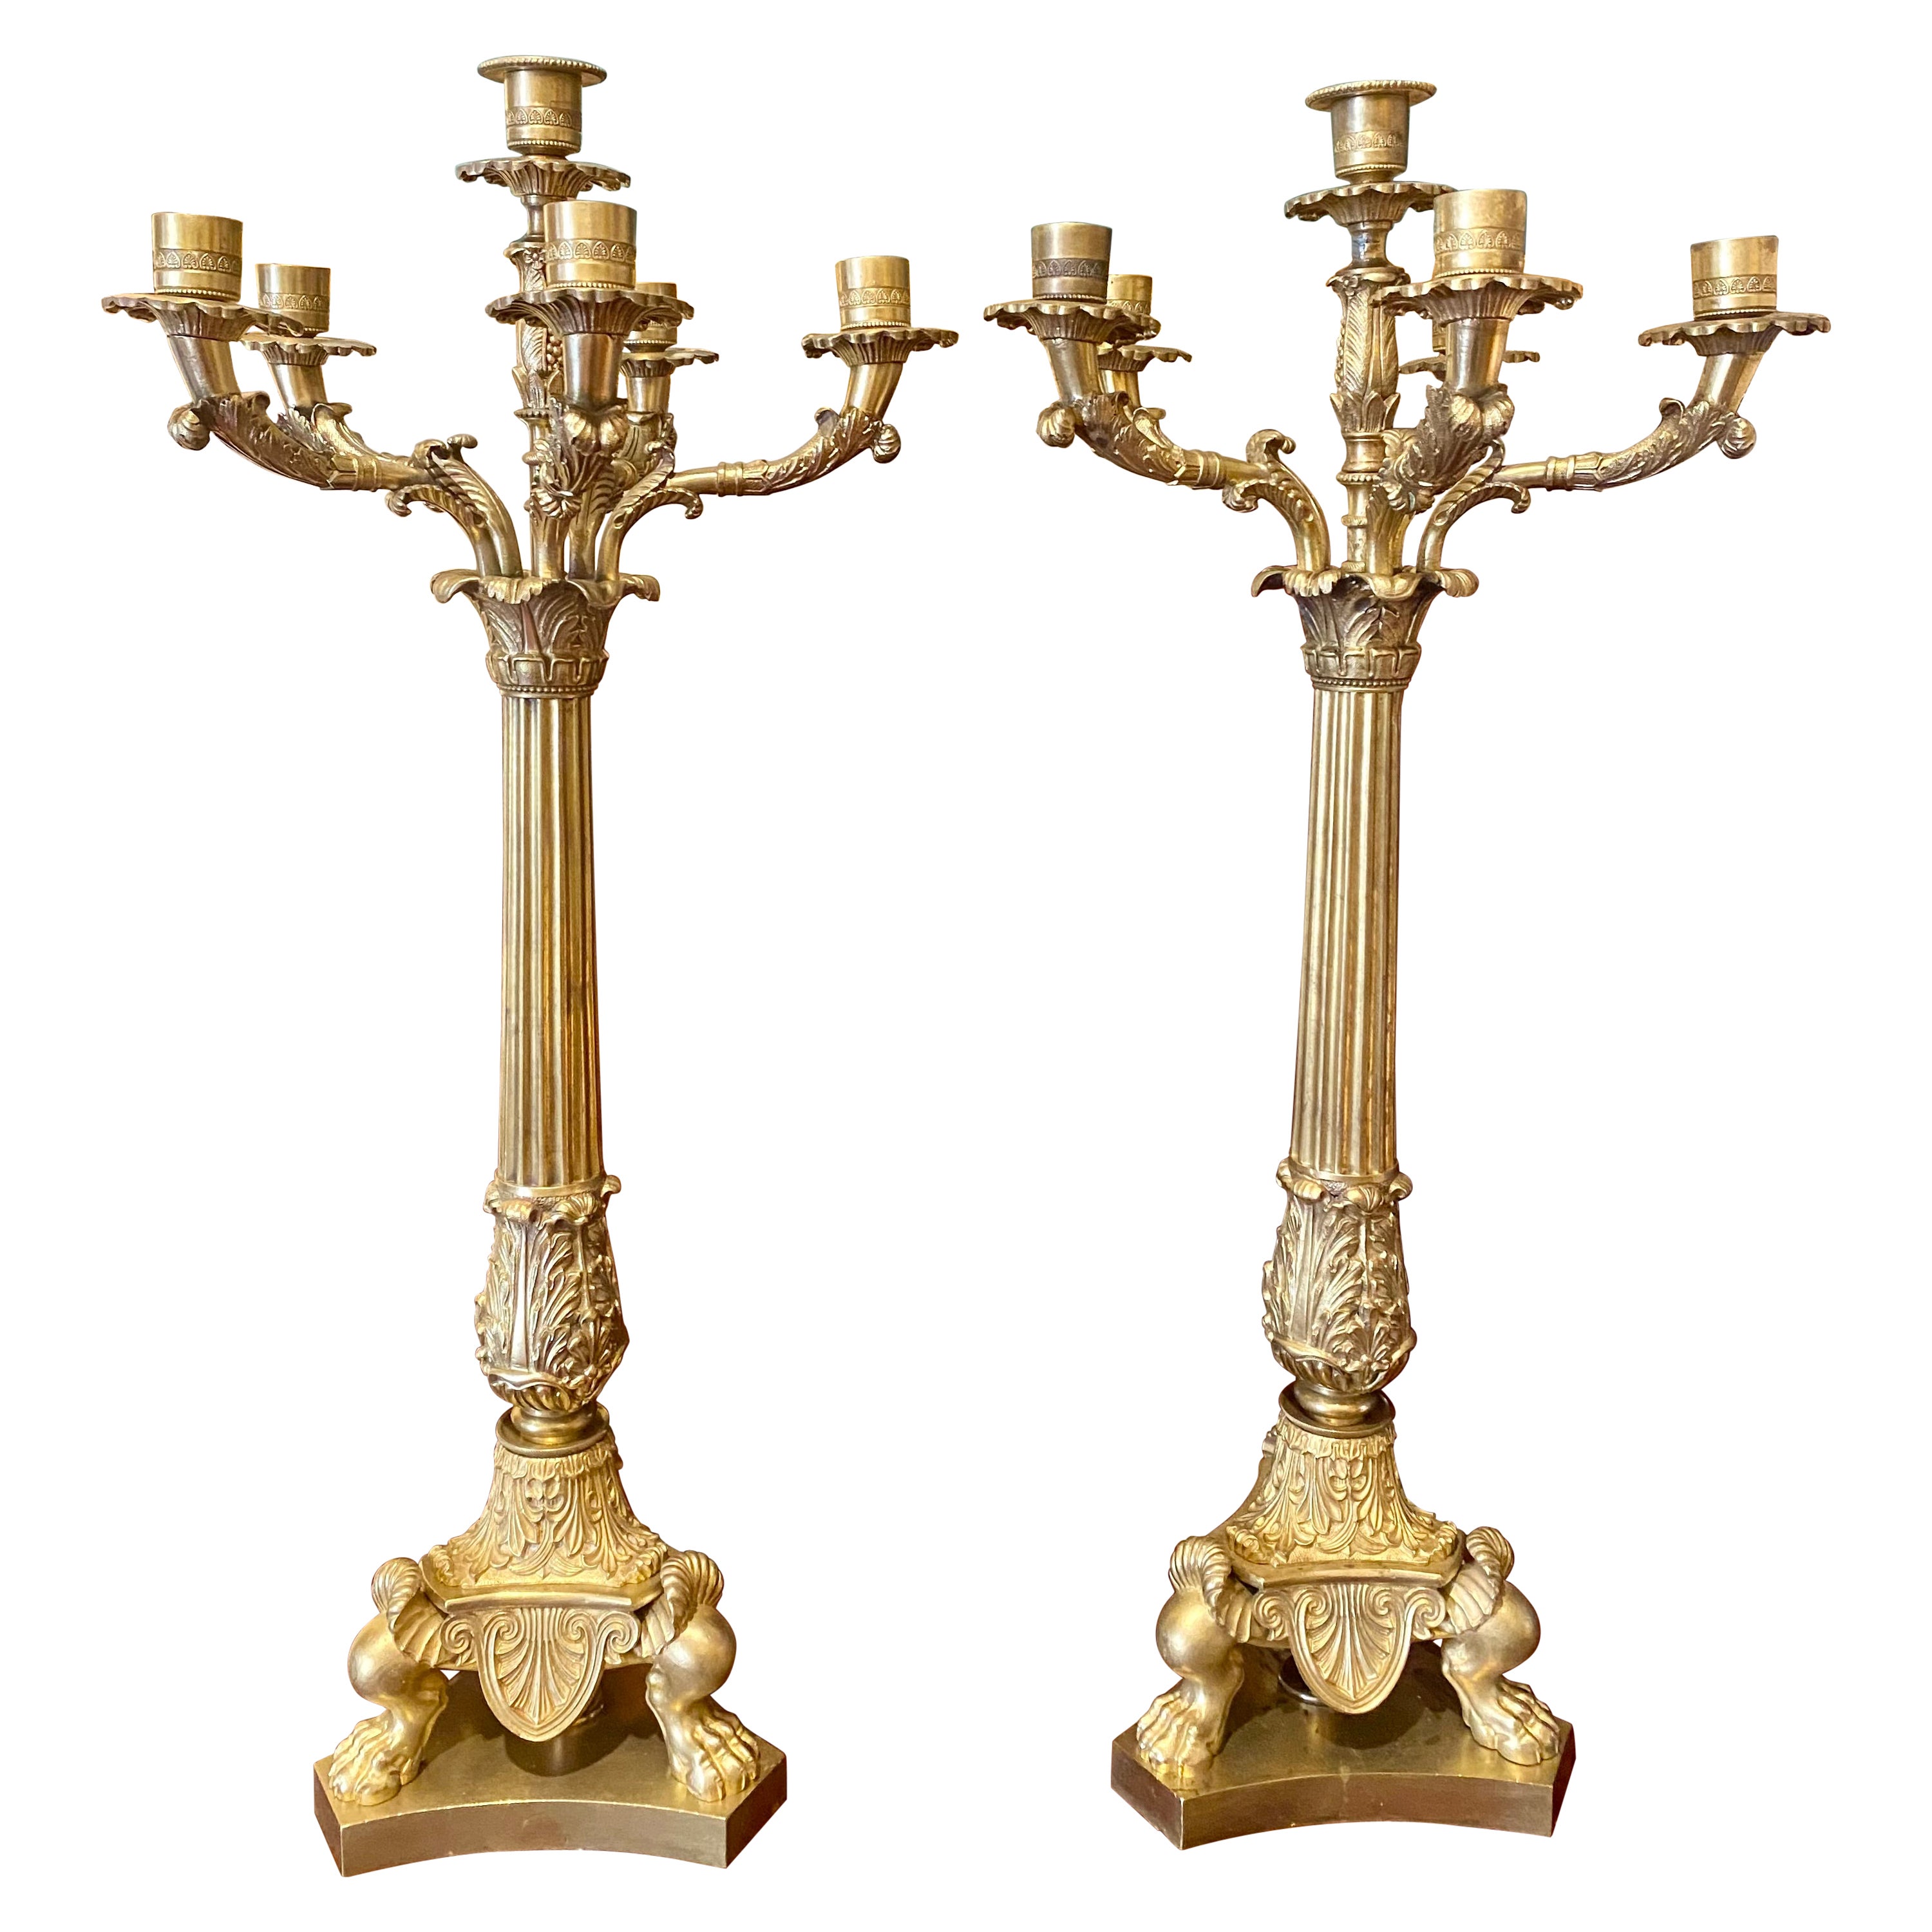 Pair Antique French Empire Gold Bronze Candelabra Lamps, Circa 1890-1900 For Sale